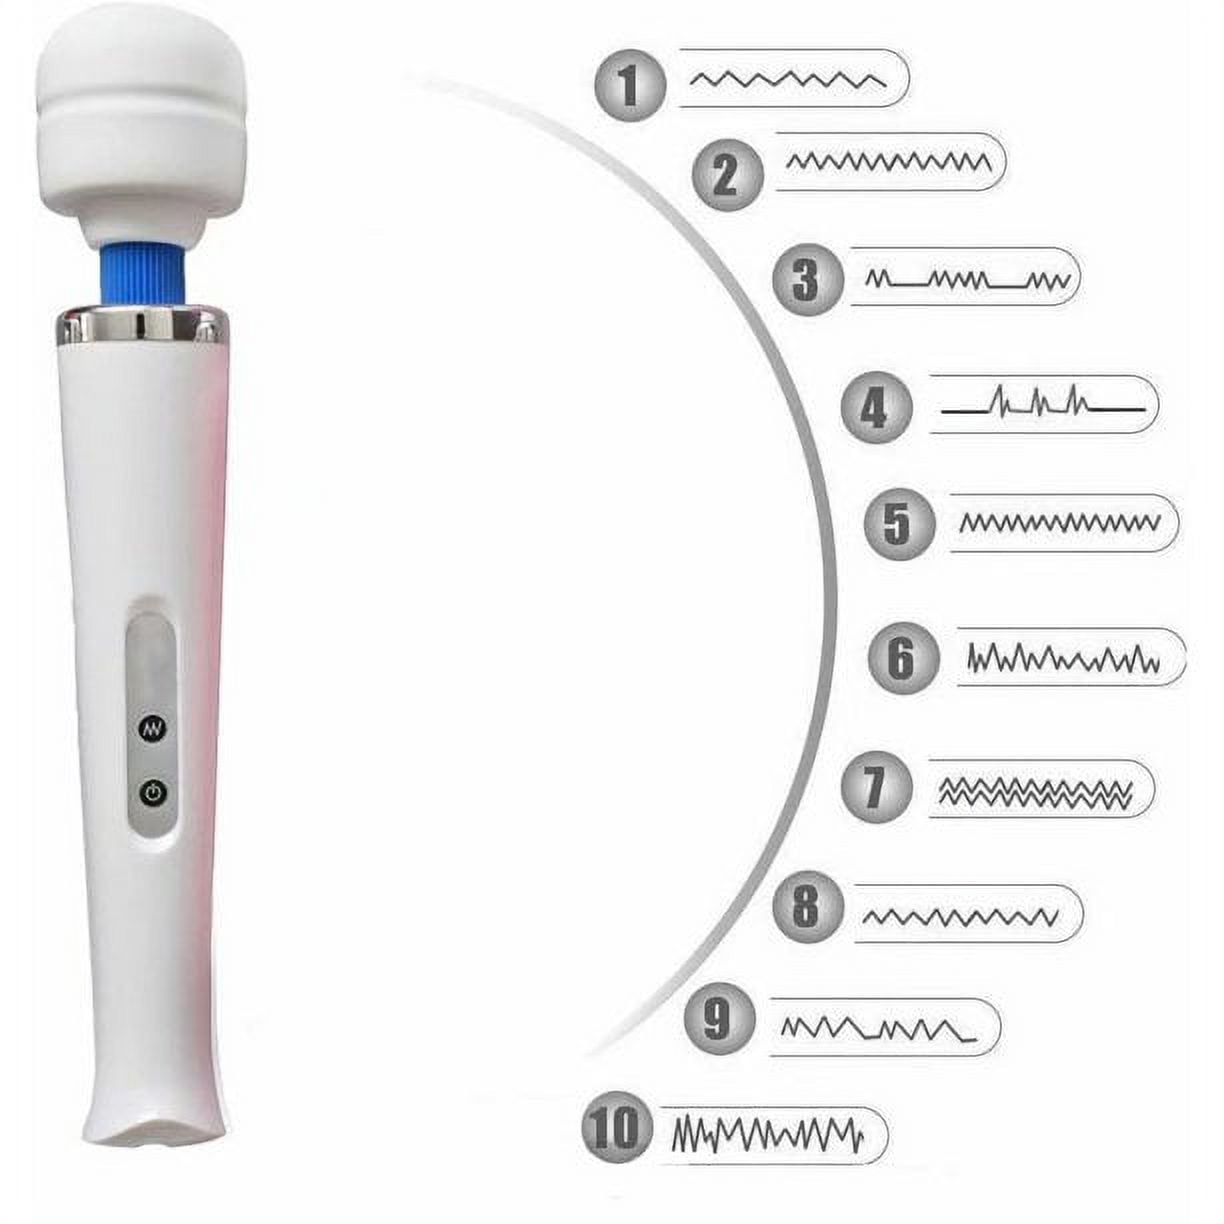 Artrylin 10 Speeds Usb Wired Powerful Handheld Wand Massager With Strong Vibration Personal